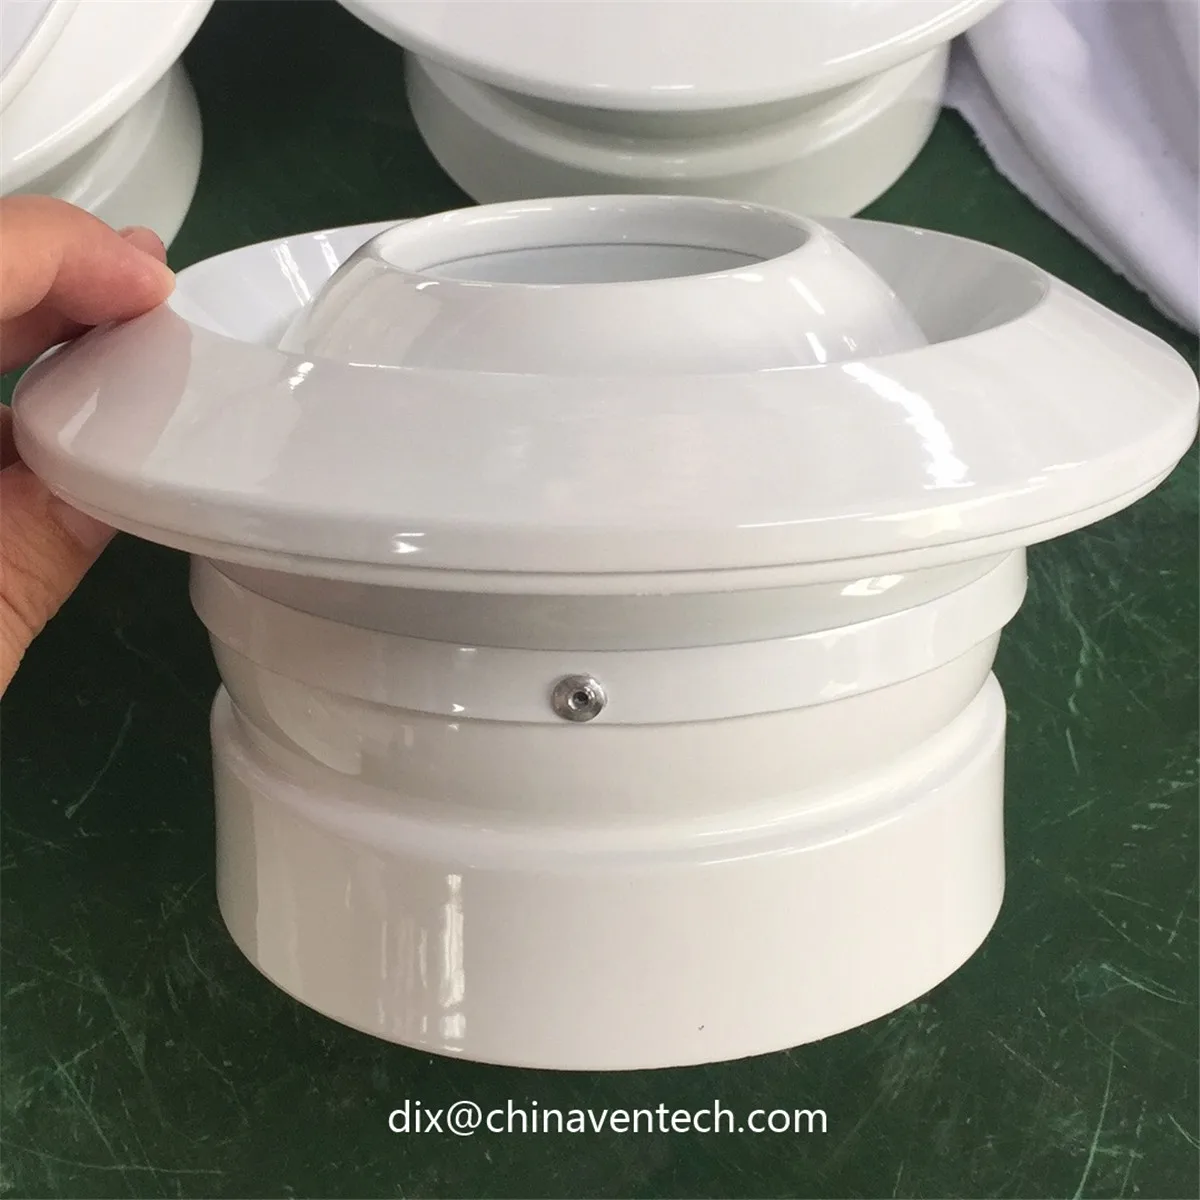 Hvac high ceiling round jet diffuser supply air adjustable air vent diffuser